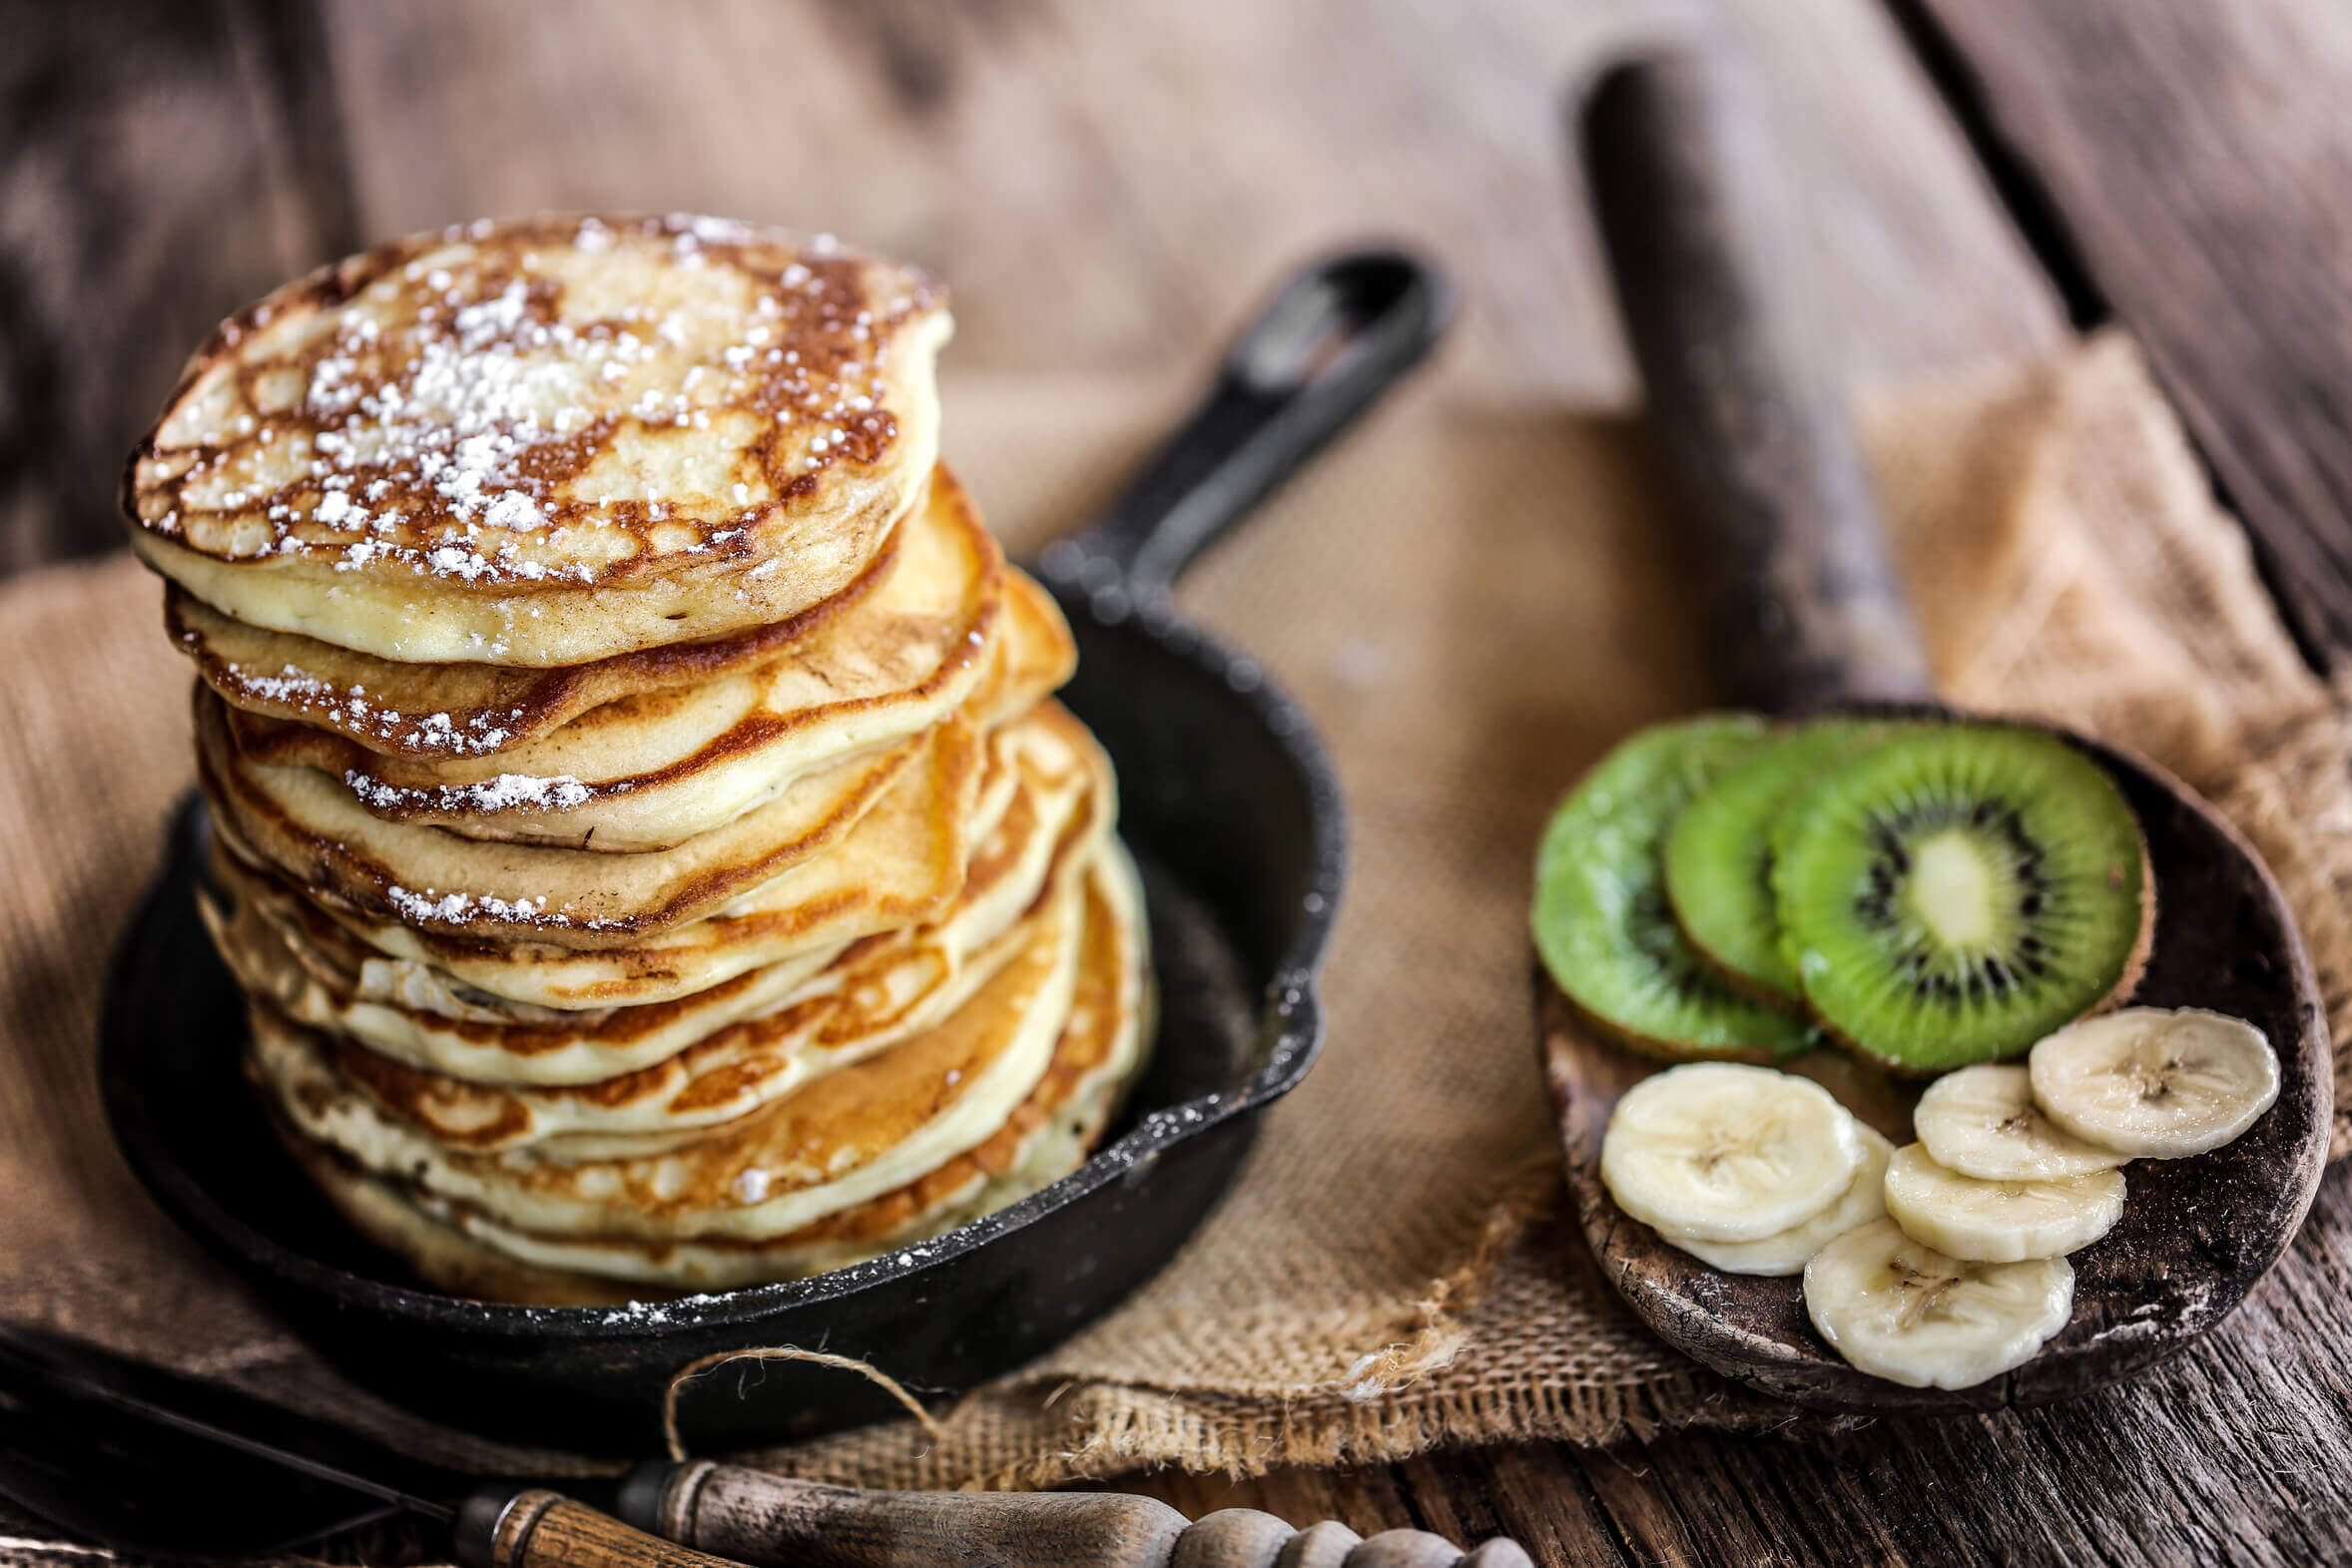 Can you eat pancakes when you’re dieting? Yes, you can!